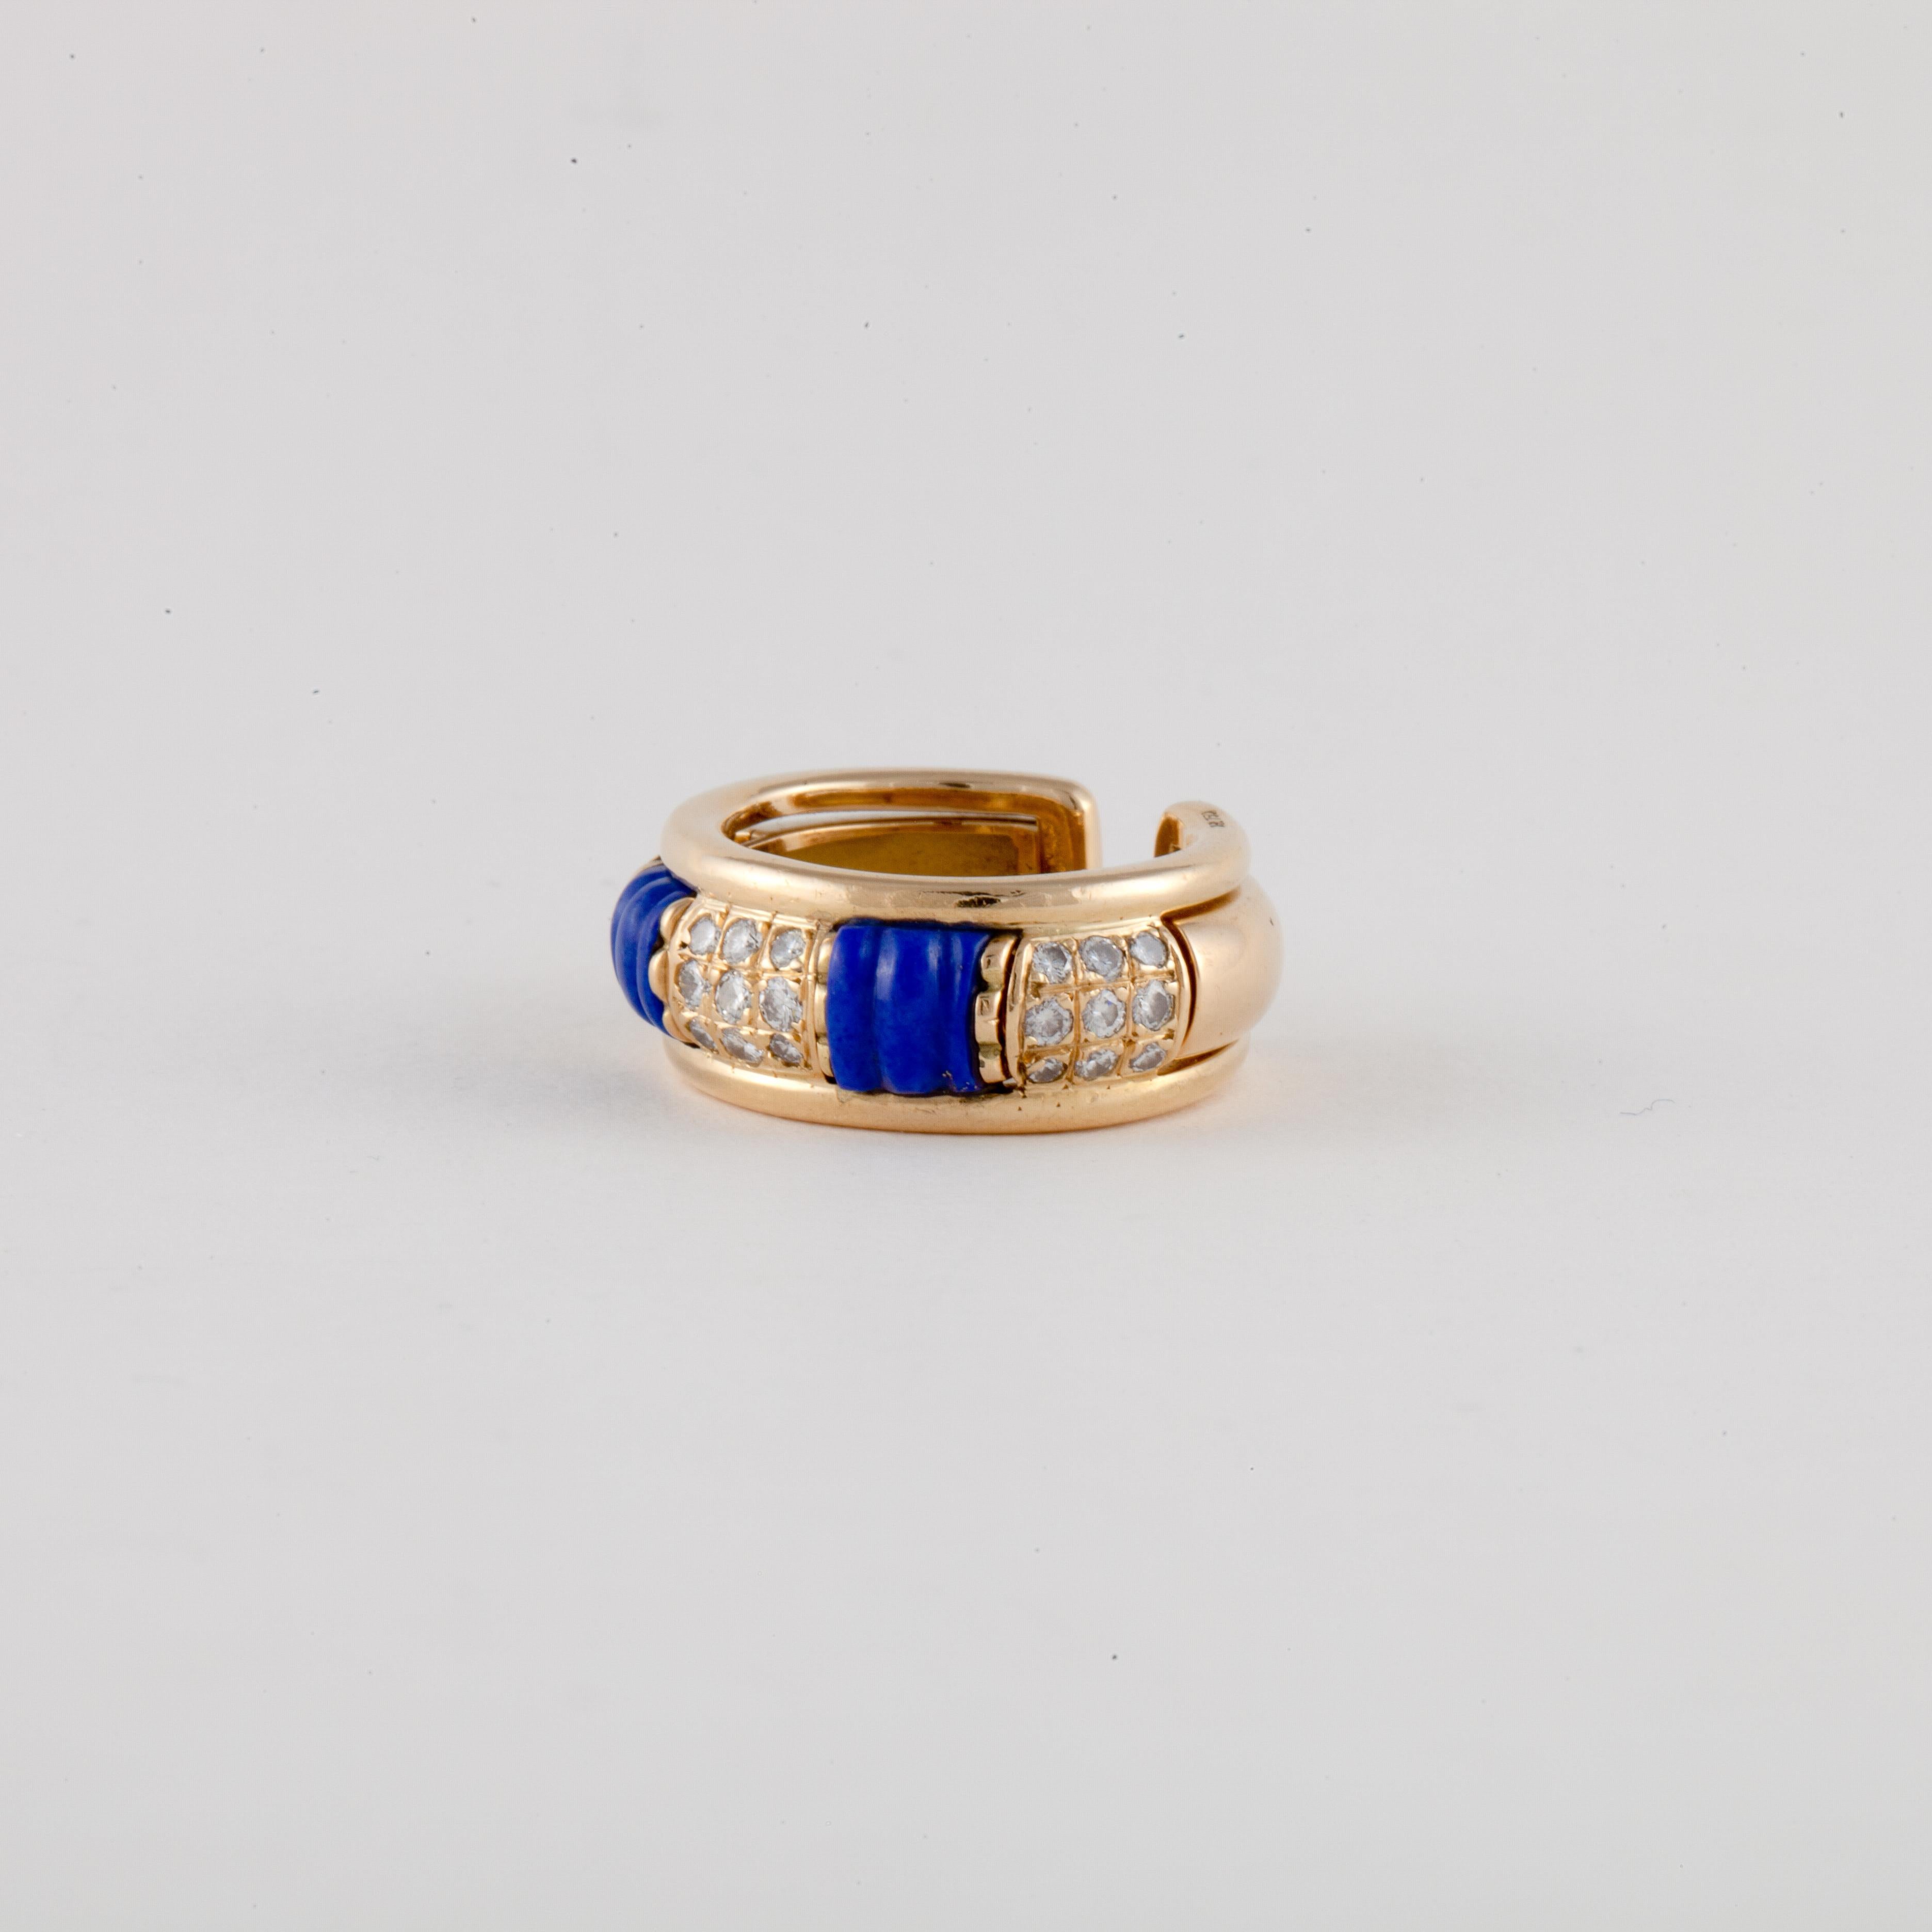 Boucheron ring is 18K yellow gold with carved lapis and diamond accents.  The ring is marked 